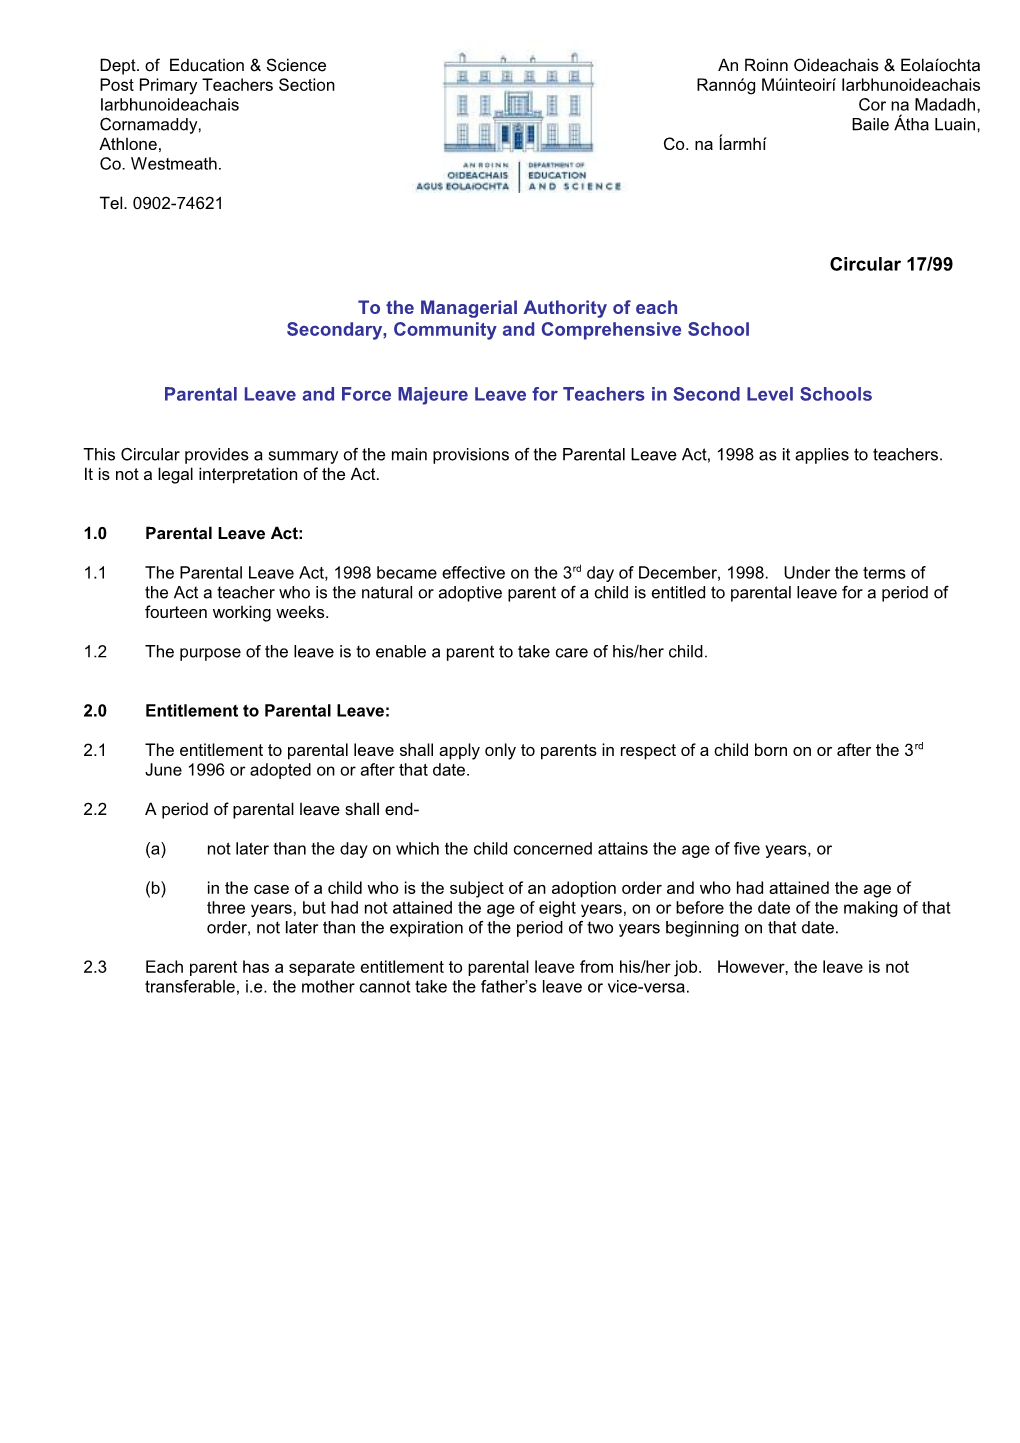 Circular 17/99 -Parental Leave and Force Majeure Leave for Teachers in Second Level Schools